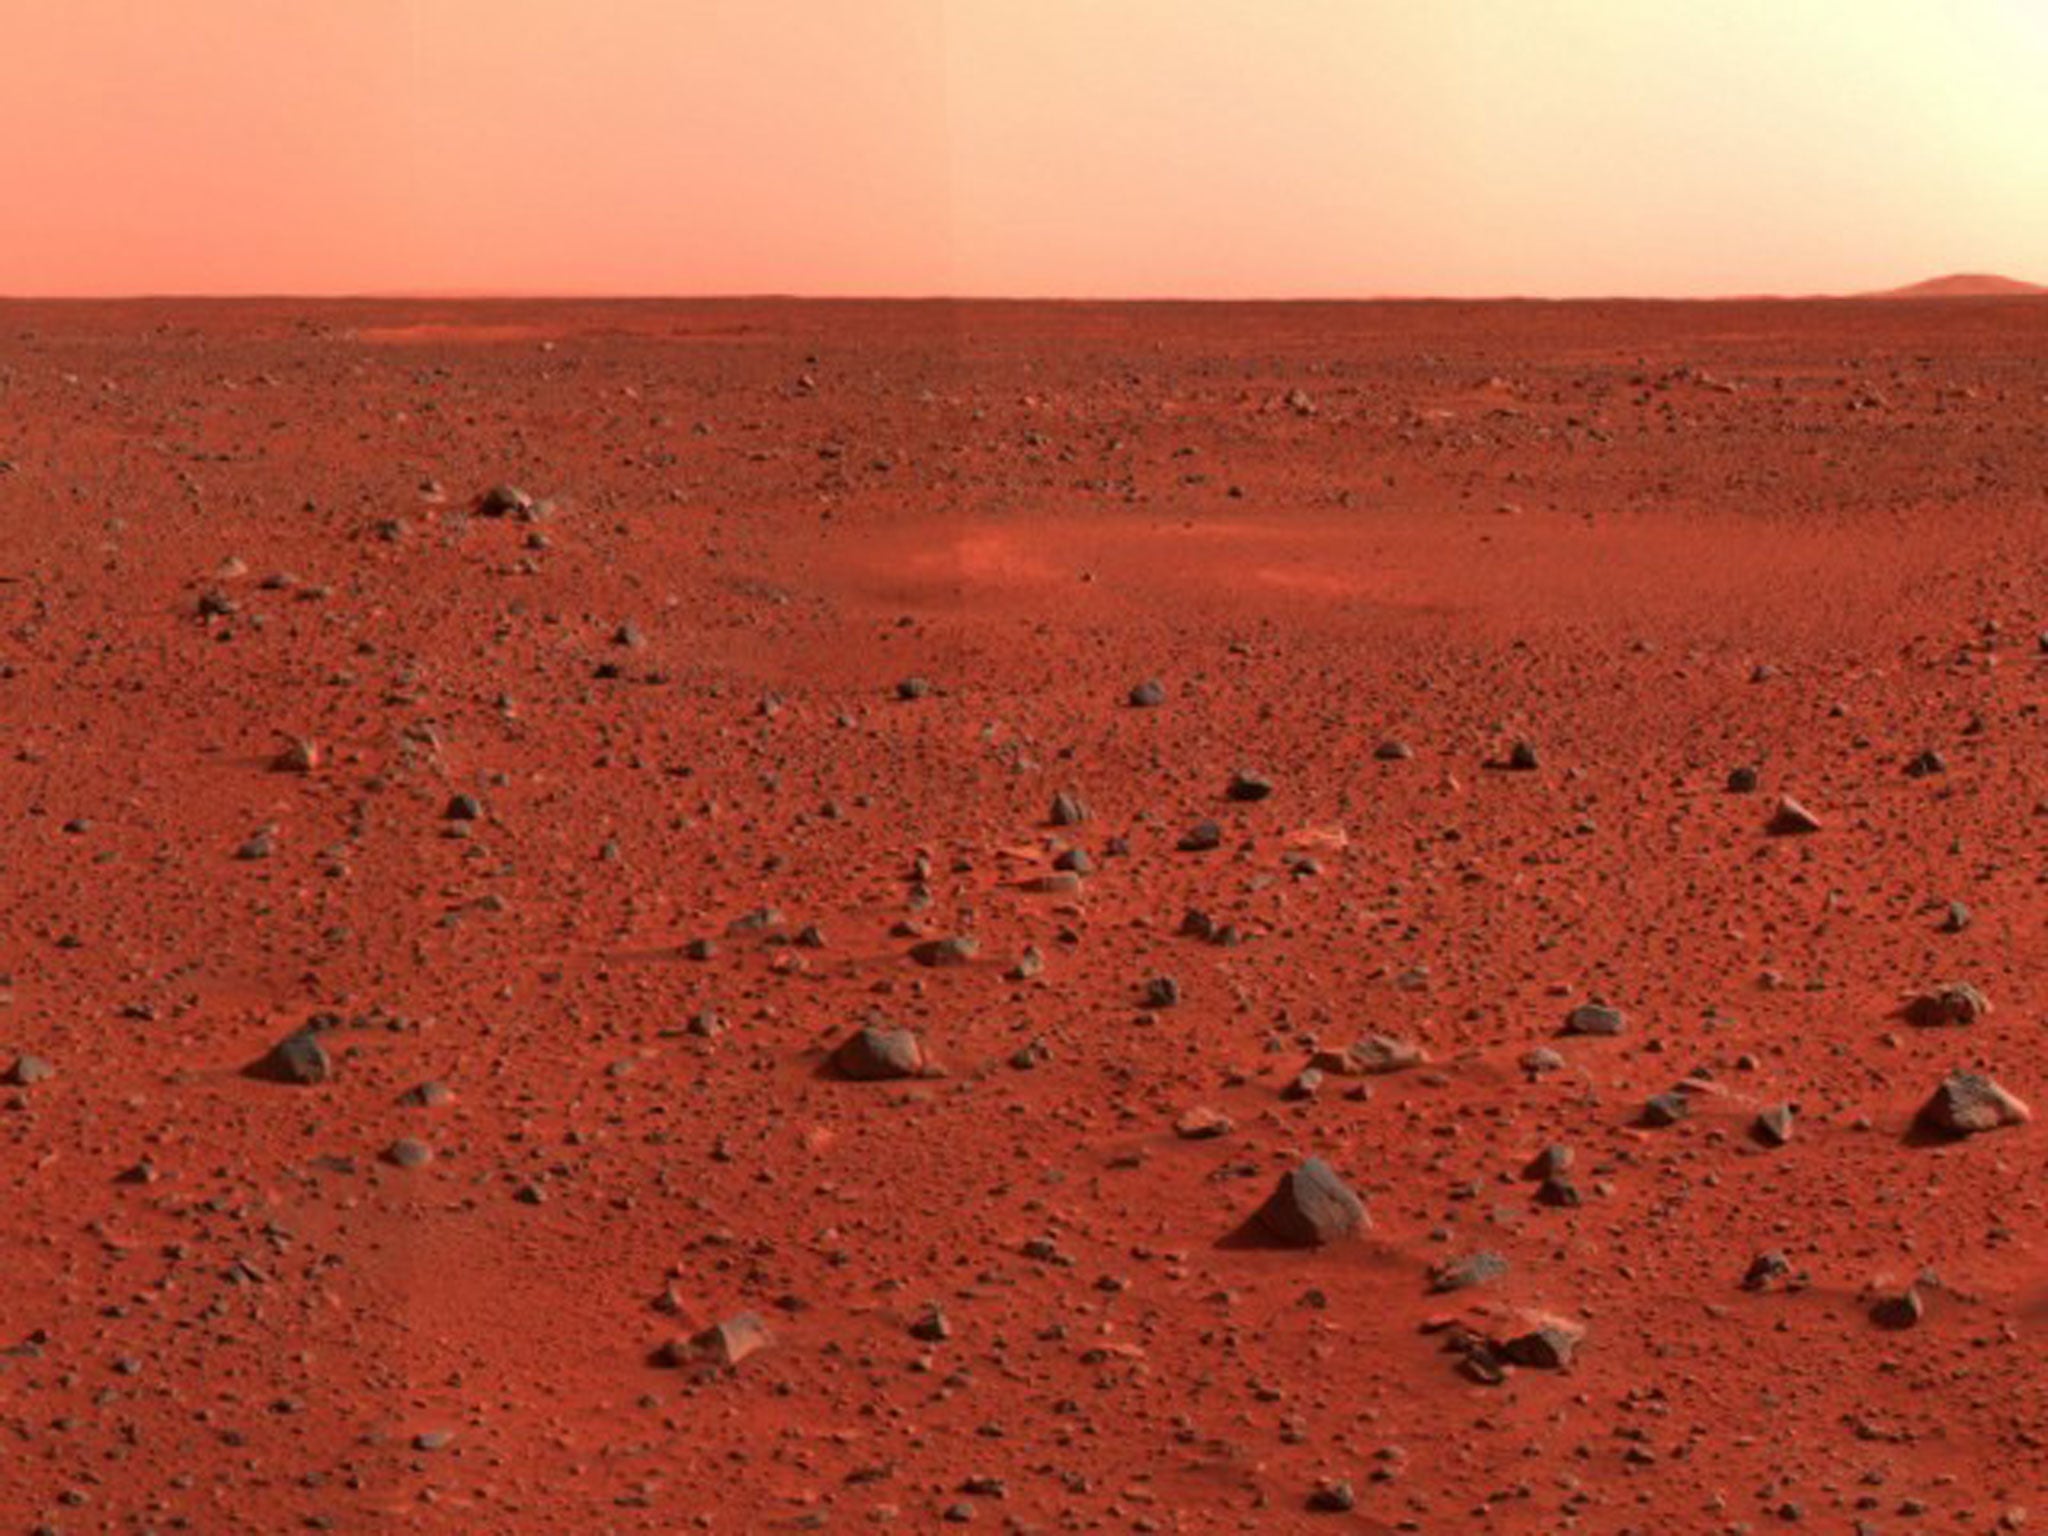 An illustration of the surface of Mars